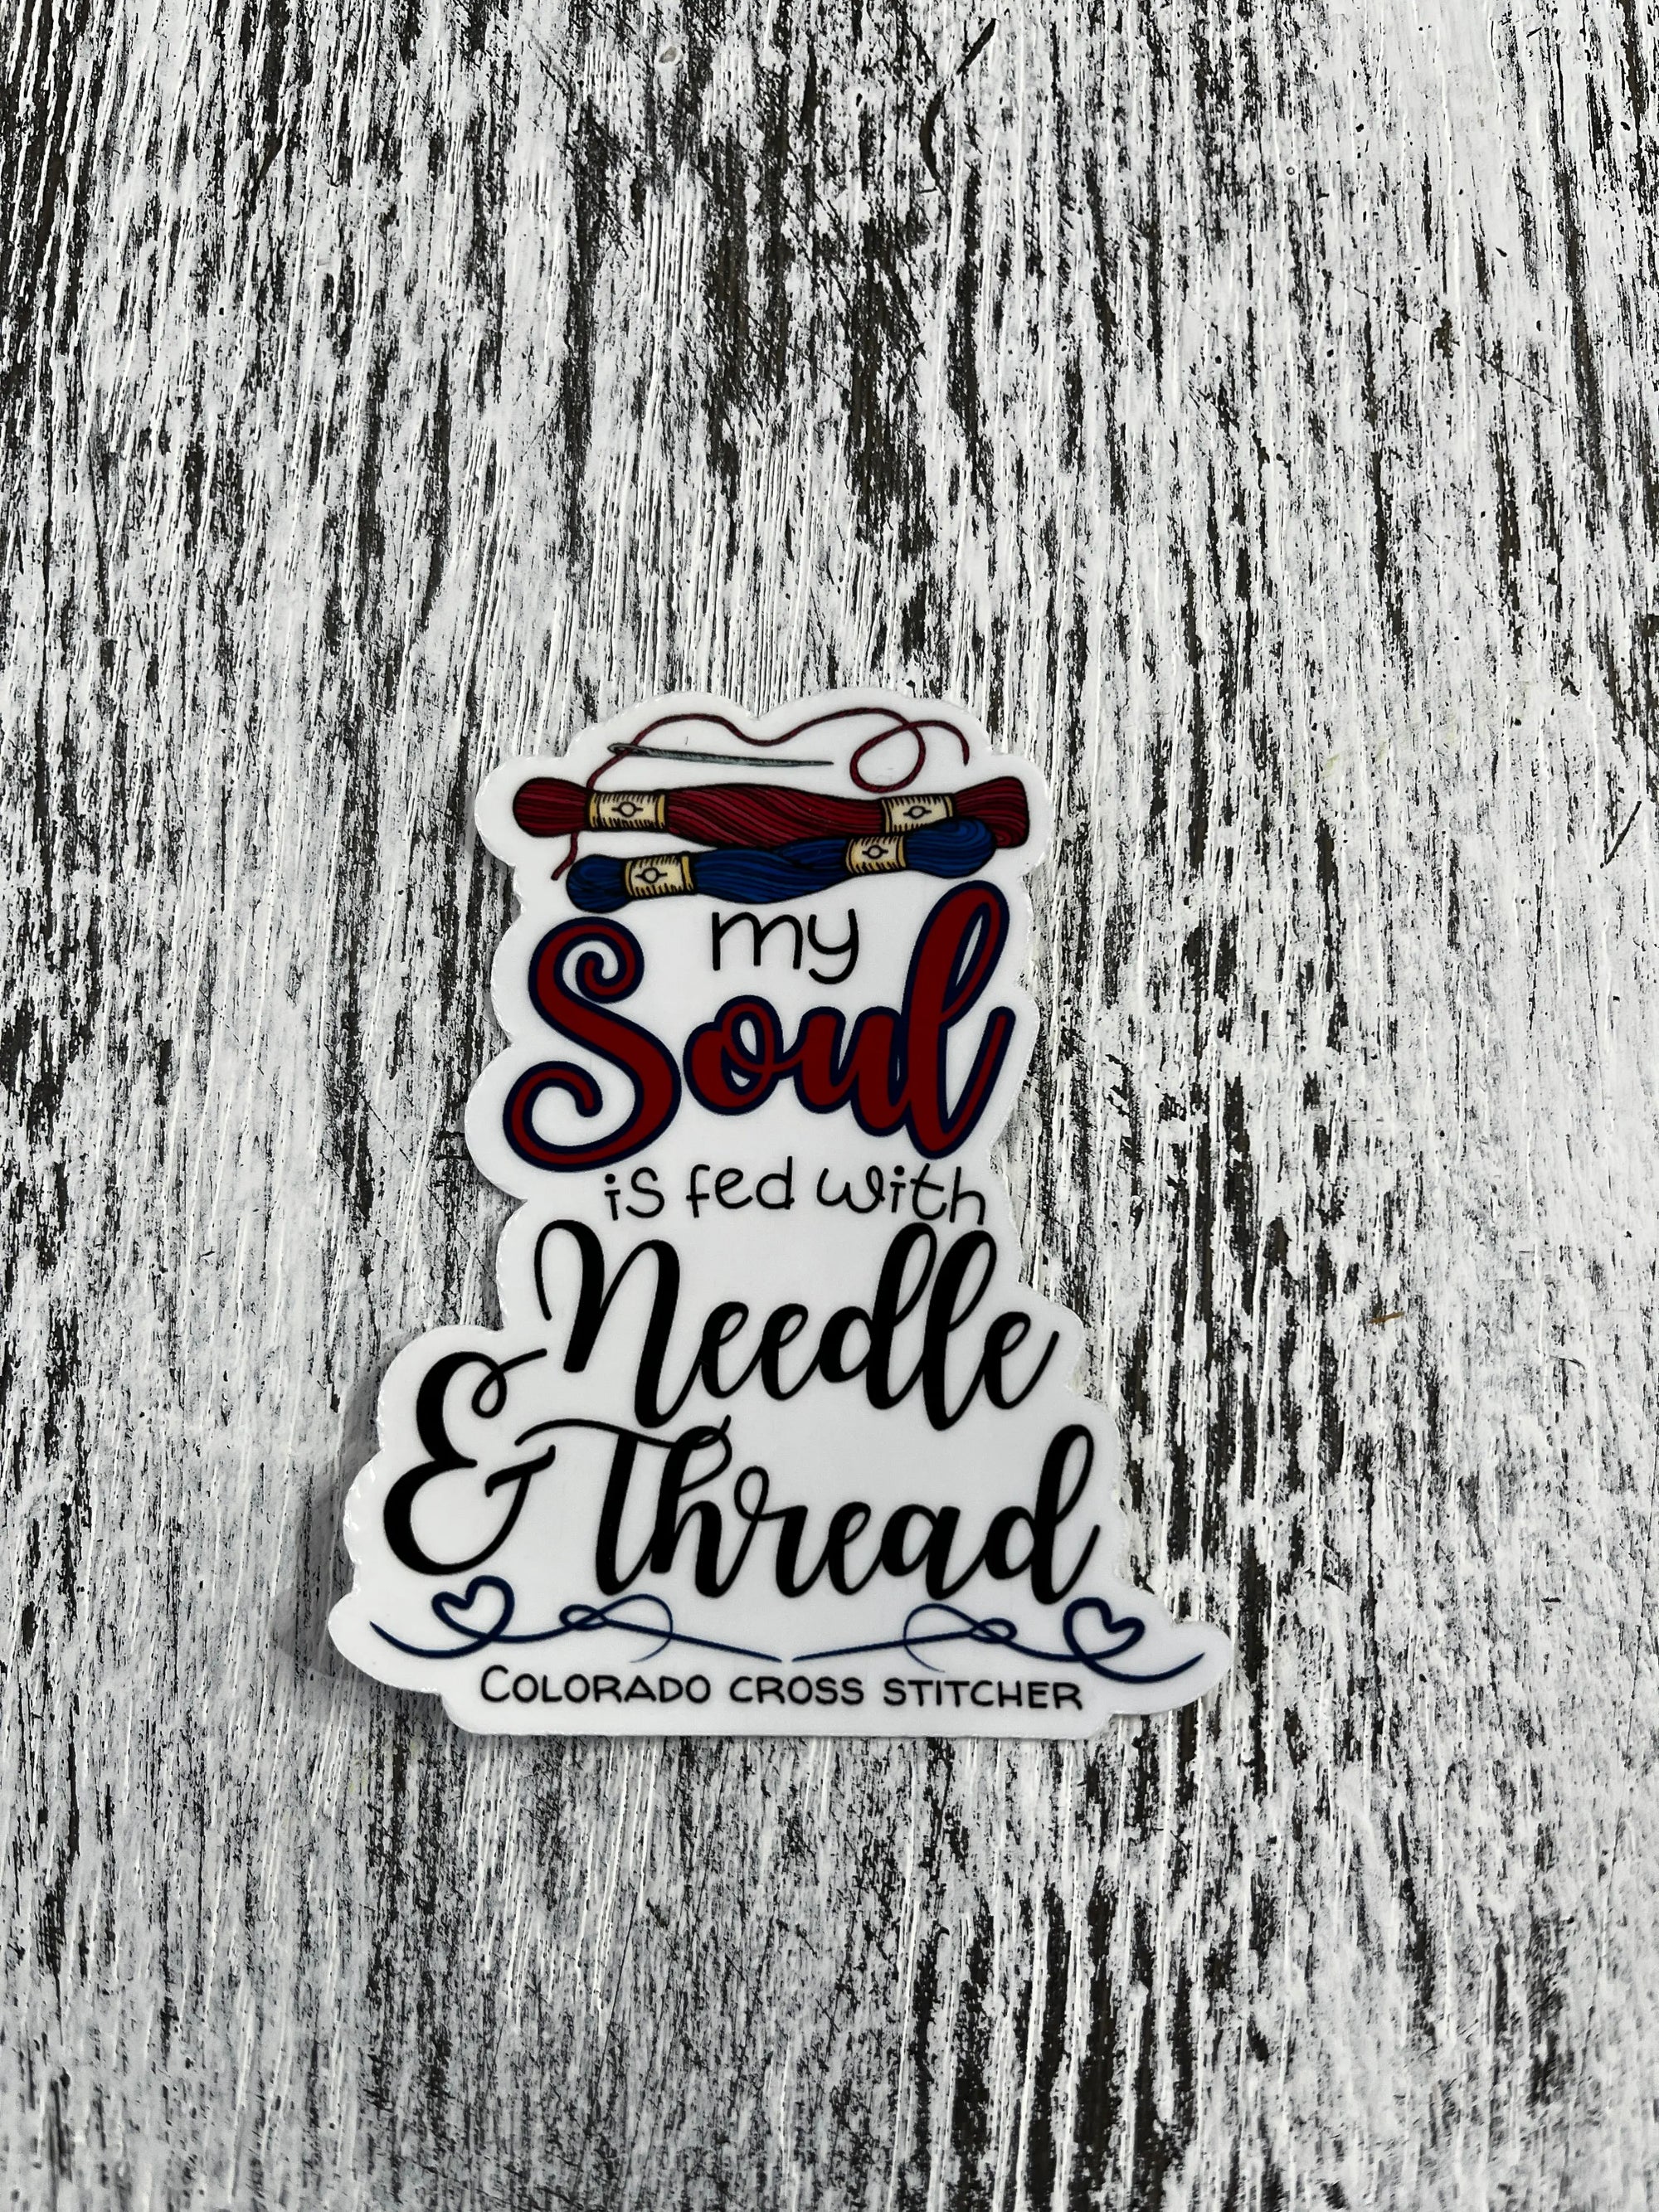 Sticker - My Soul is Fed with Needle and Thread Colorado Cross Stitcher